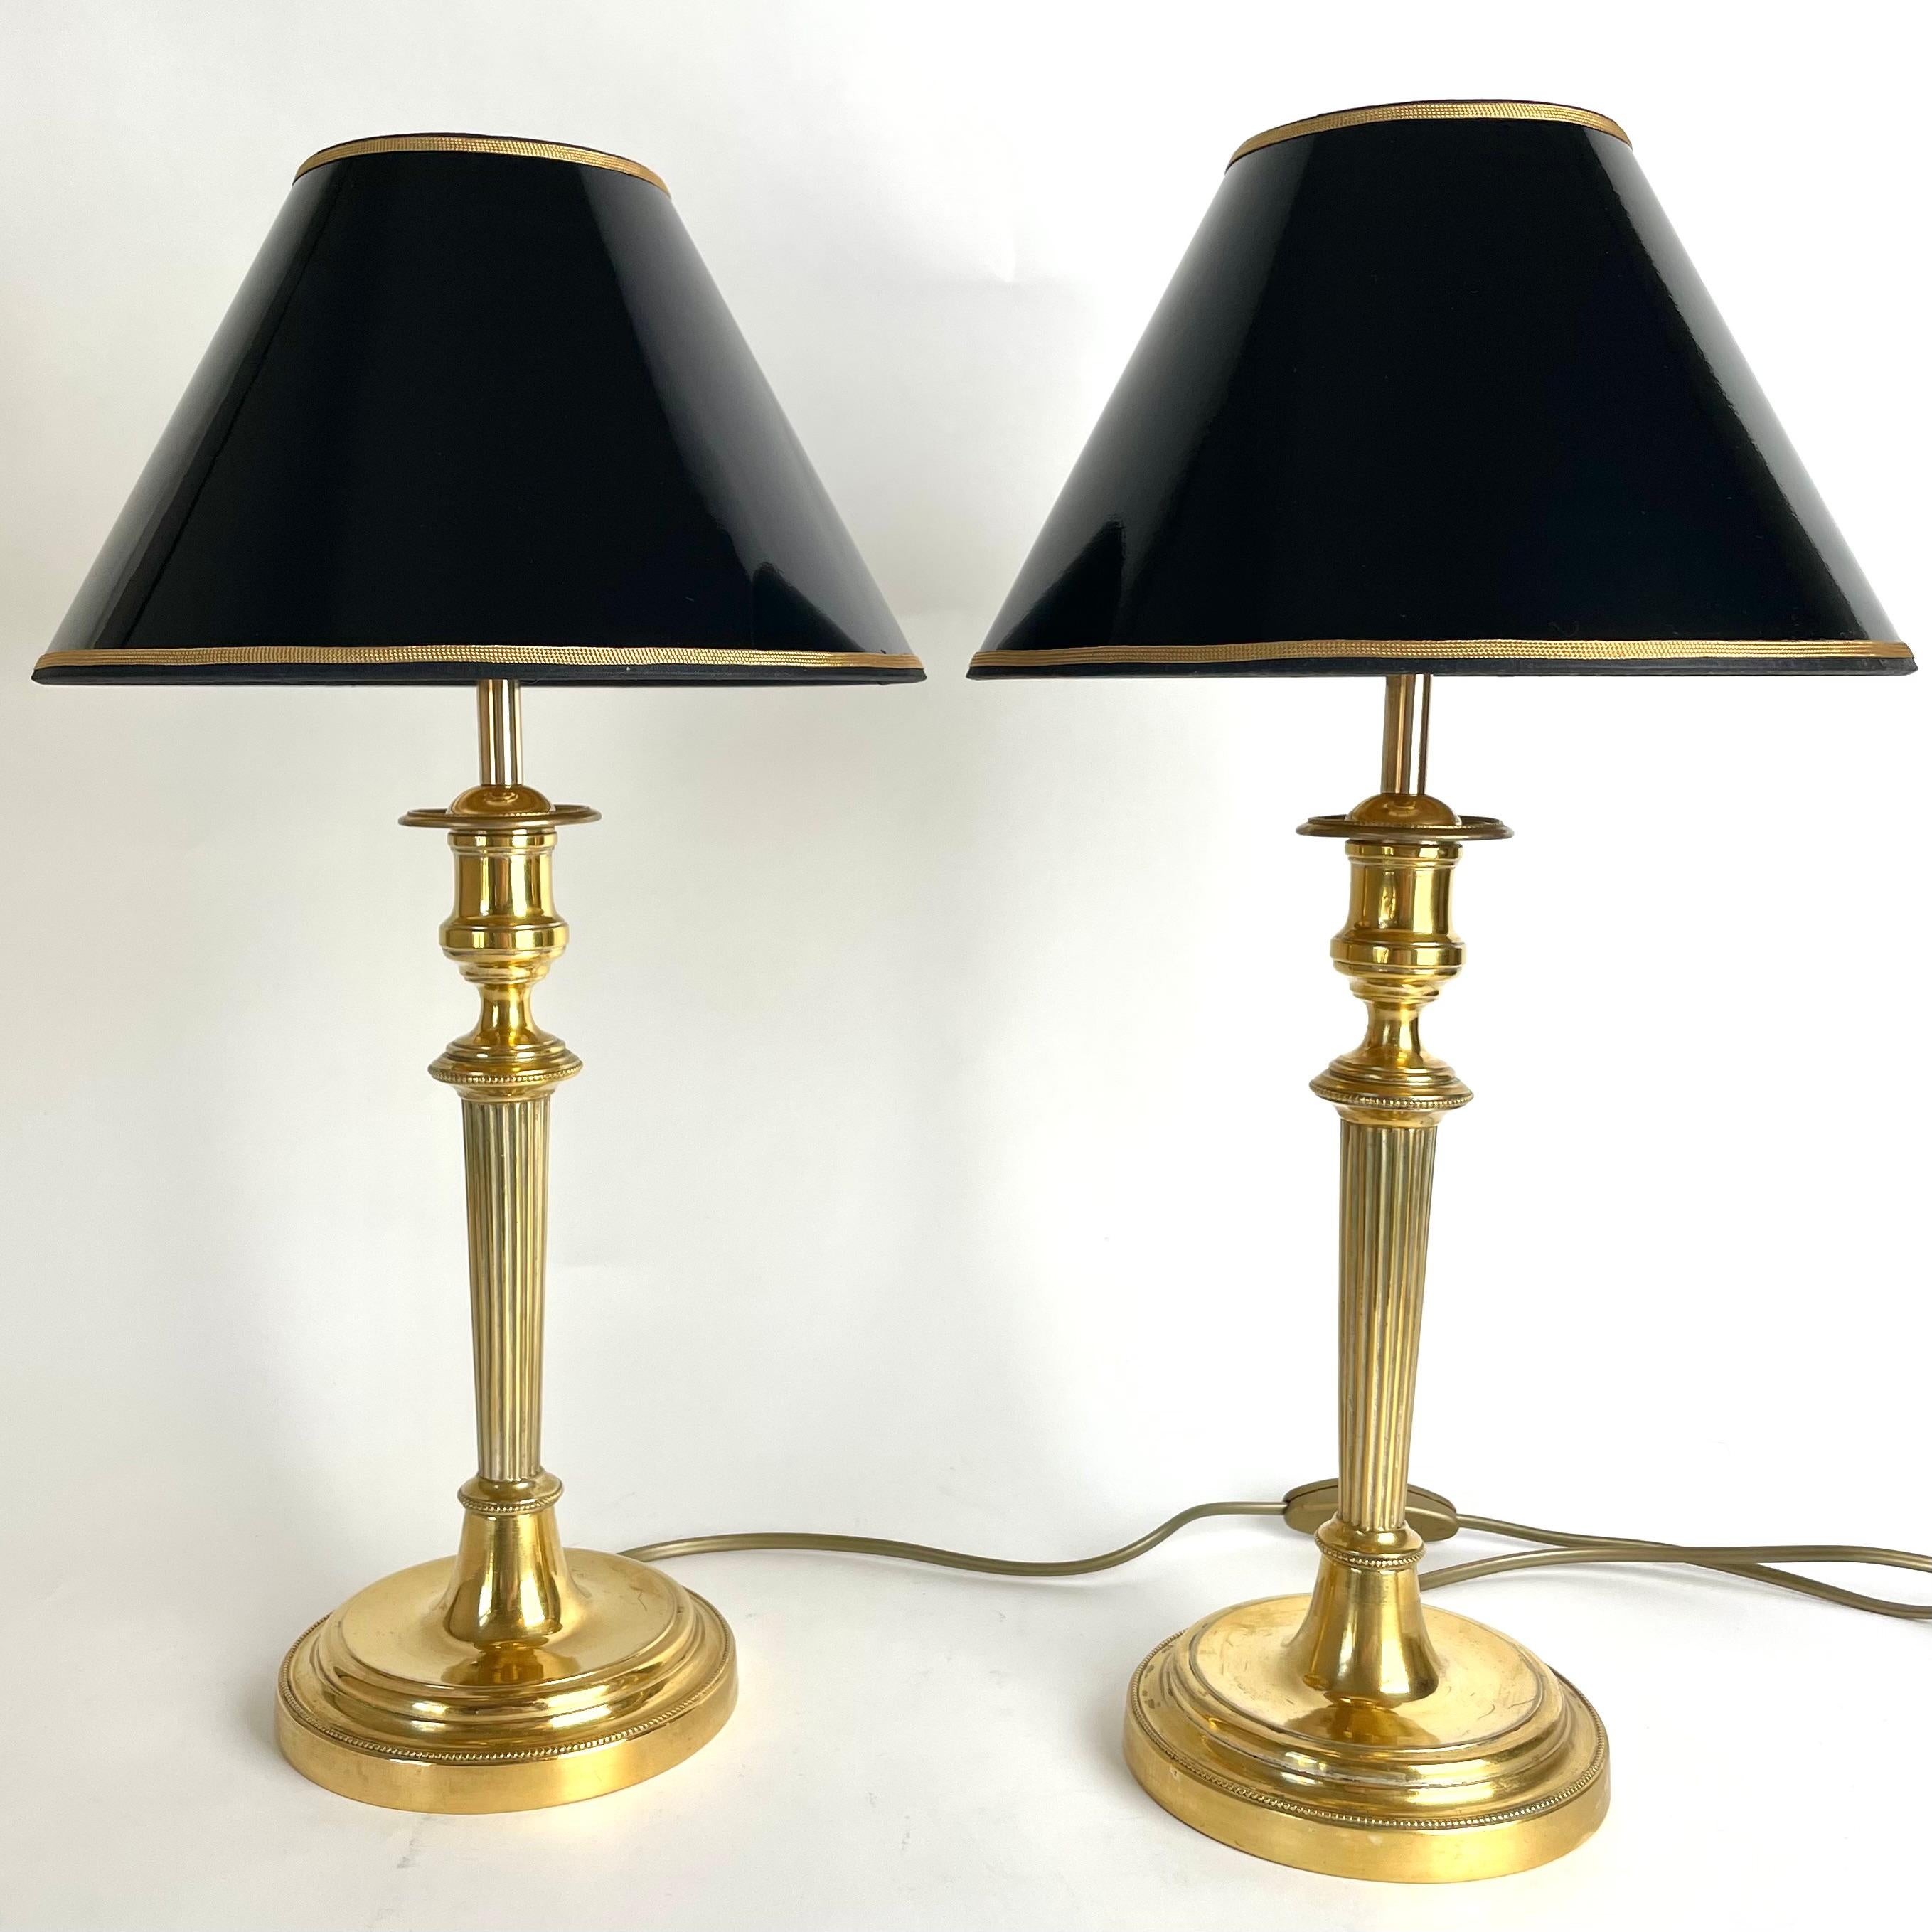 Beautiful pair of Empire Table Lamps, originally candlesticks from the 1820s For Sale 2